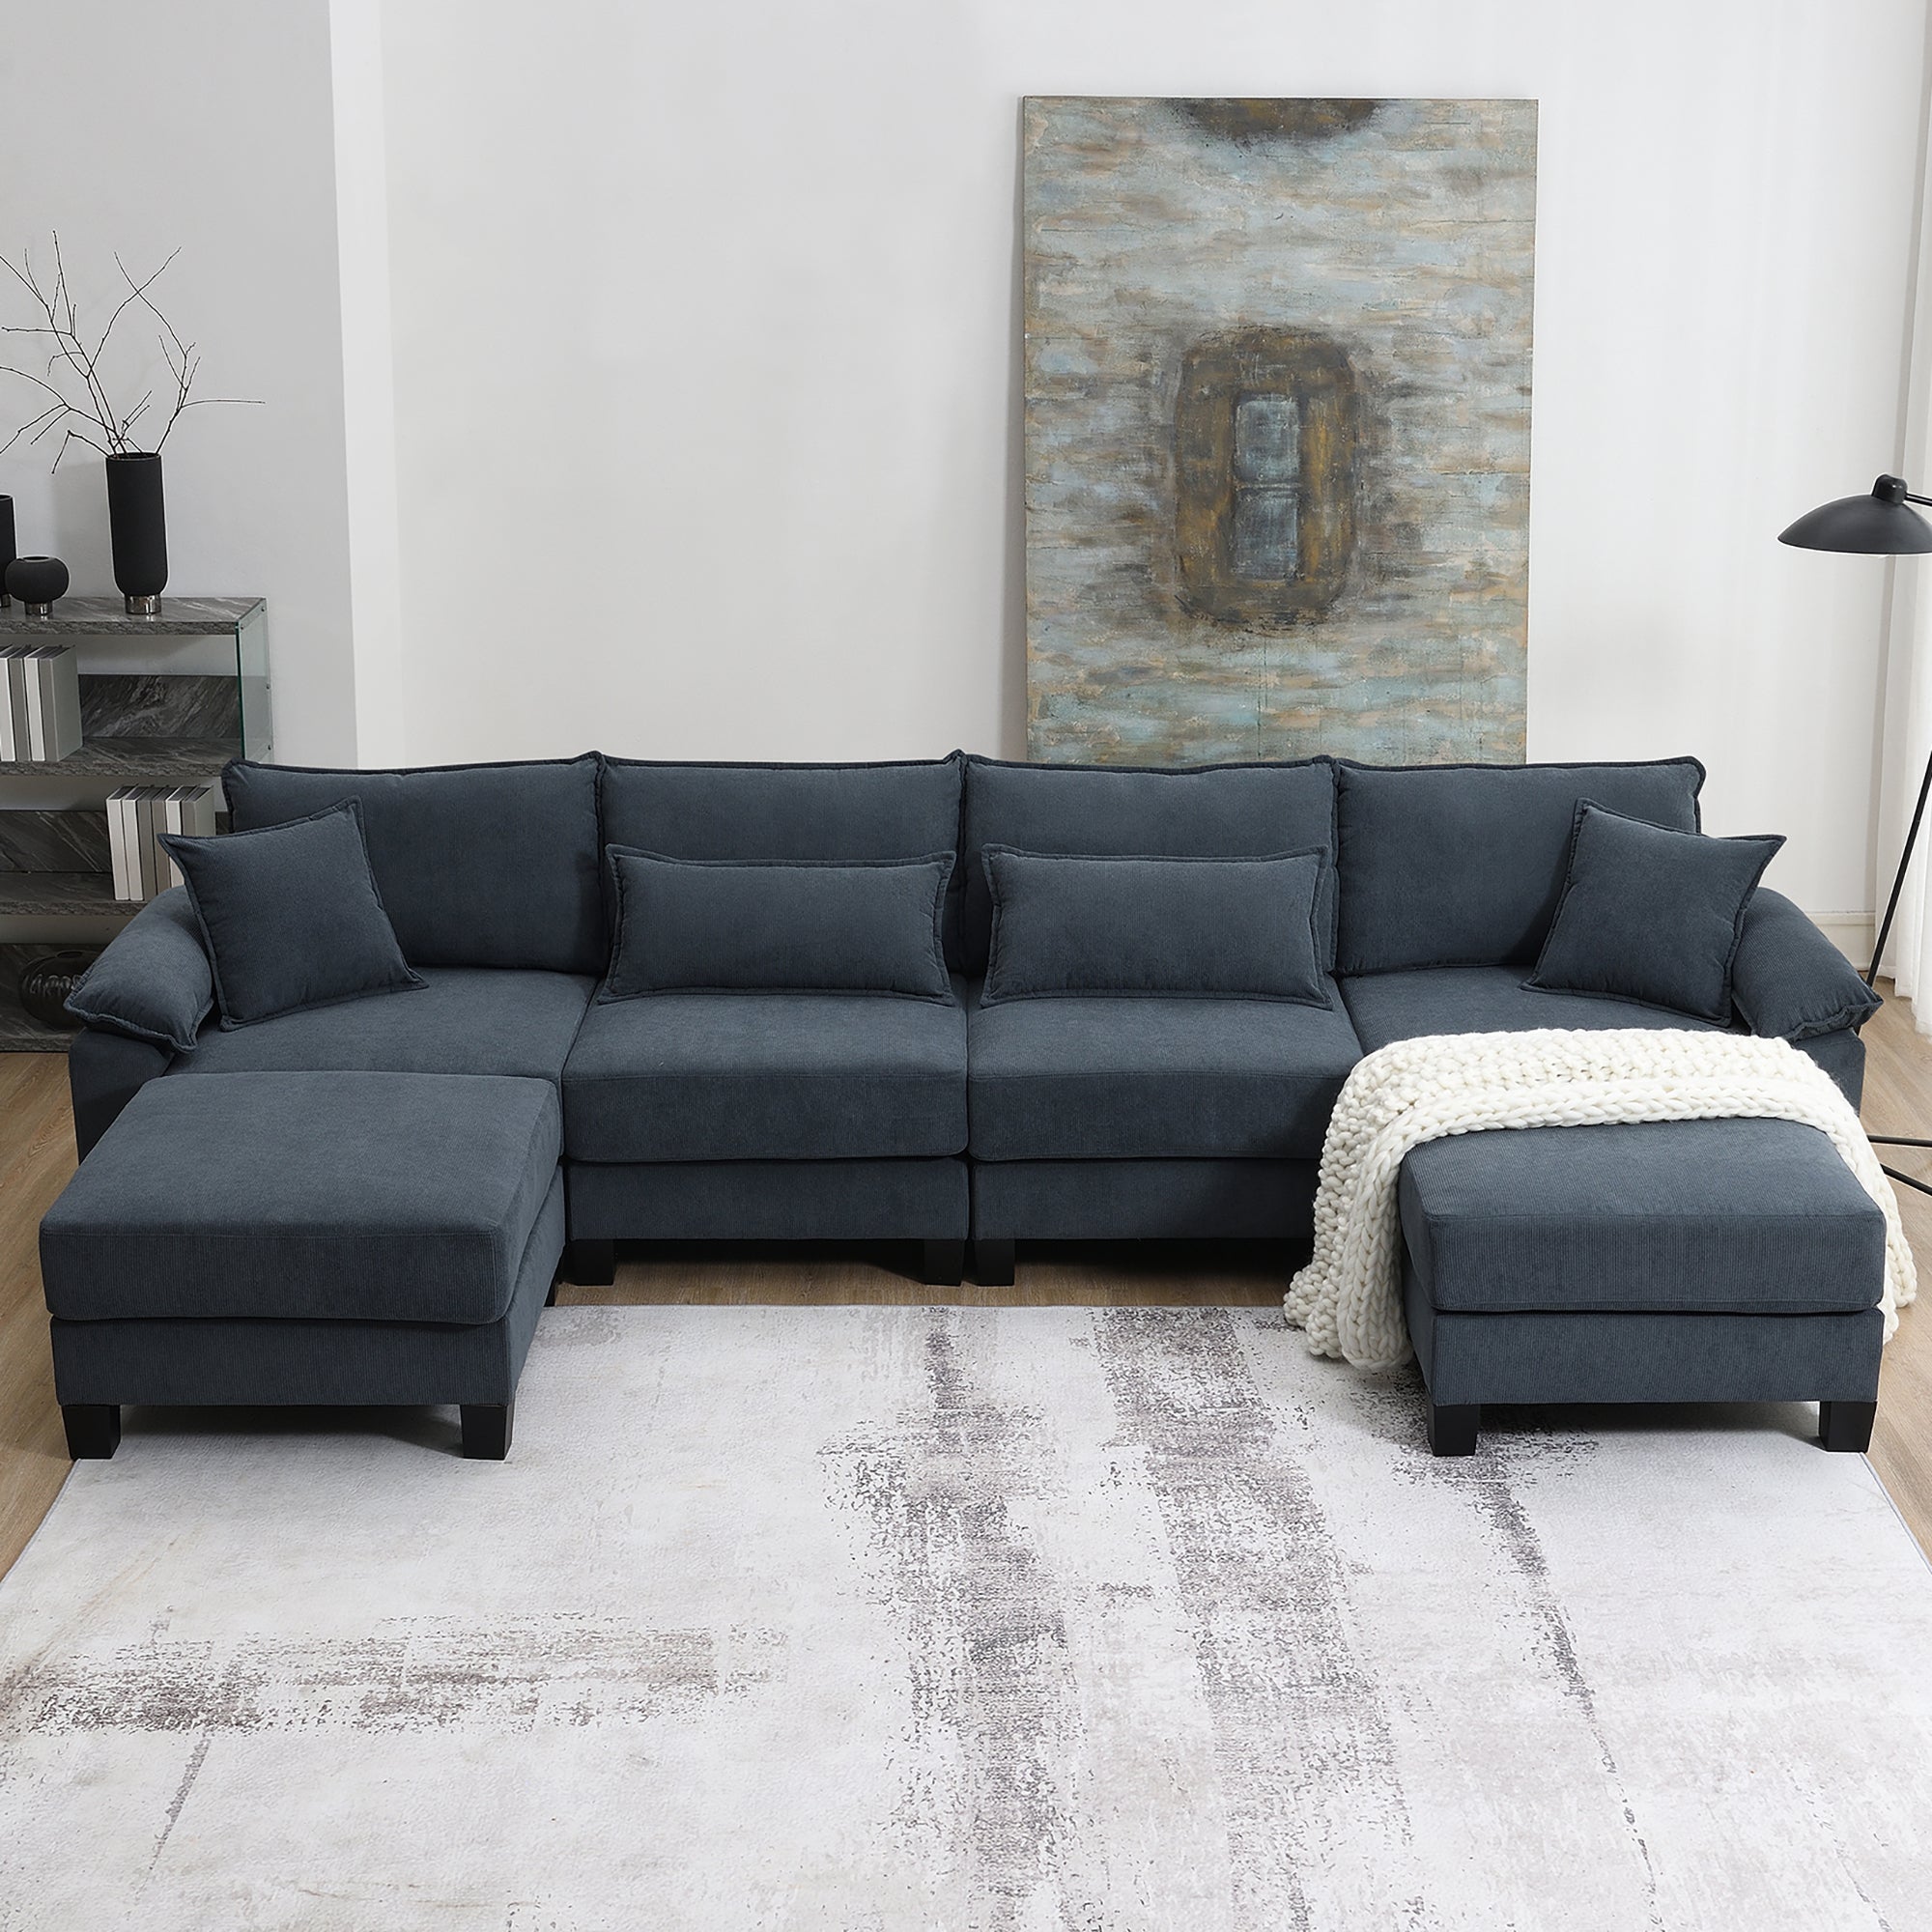 133*65" Corduroy Modular Sectional Sofa - U Shaped Couch with Armrest Bags - 6 Seat Freely Combinable Sofa Bed - Comfortable and Spacious Indoor Furniture for Living Room - Available in 2 Colors